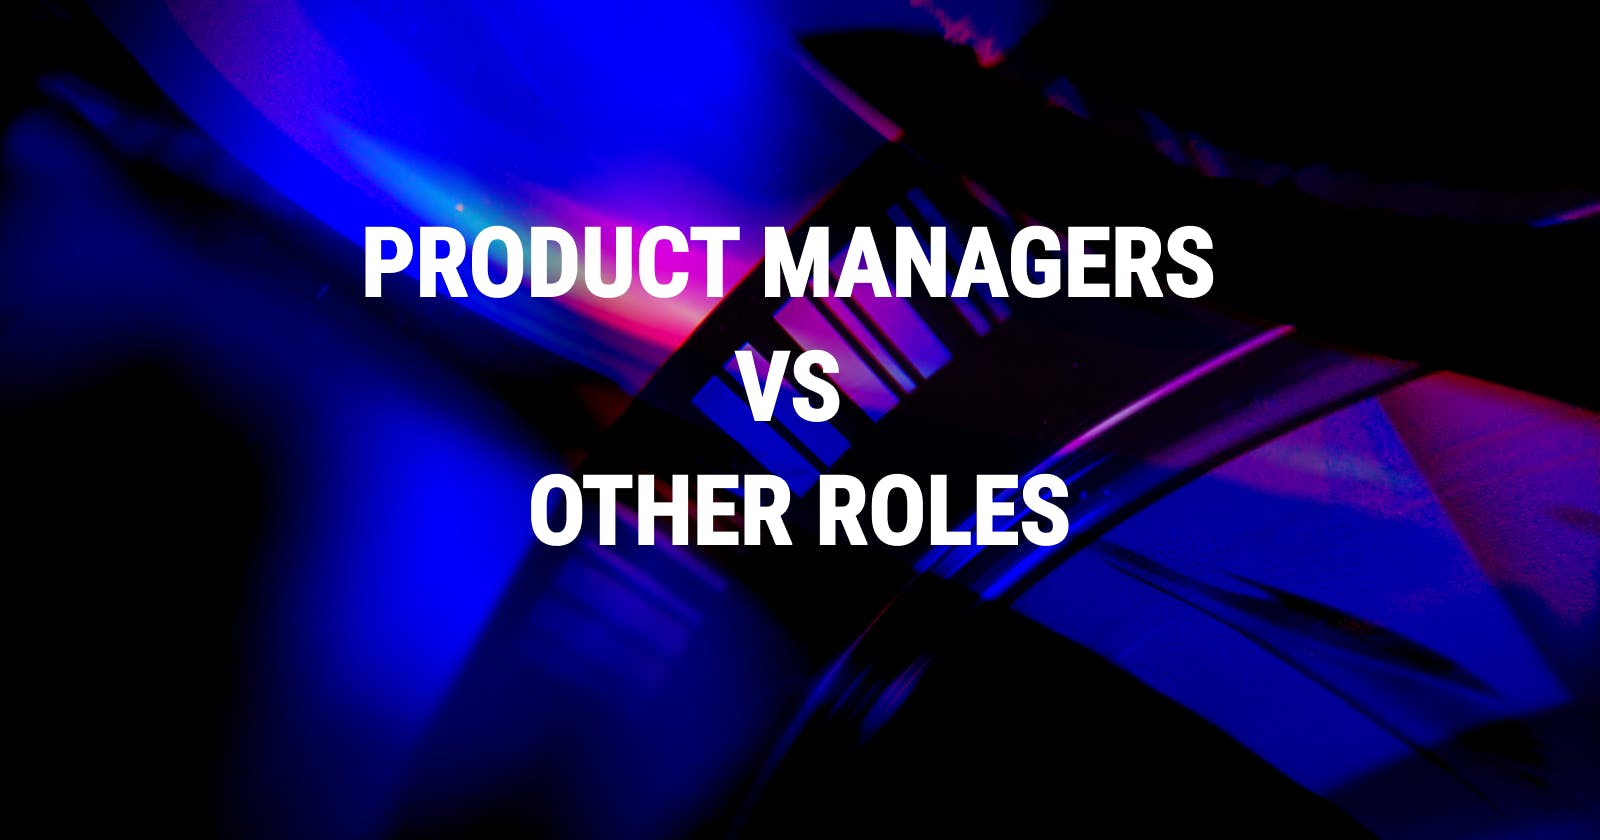 Difference Between Product Managers and Other Roles